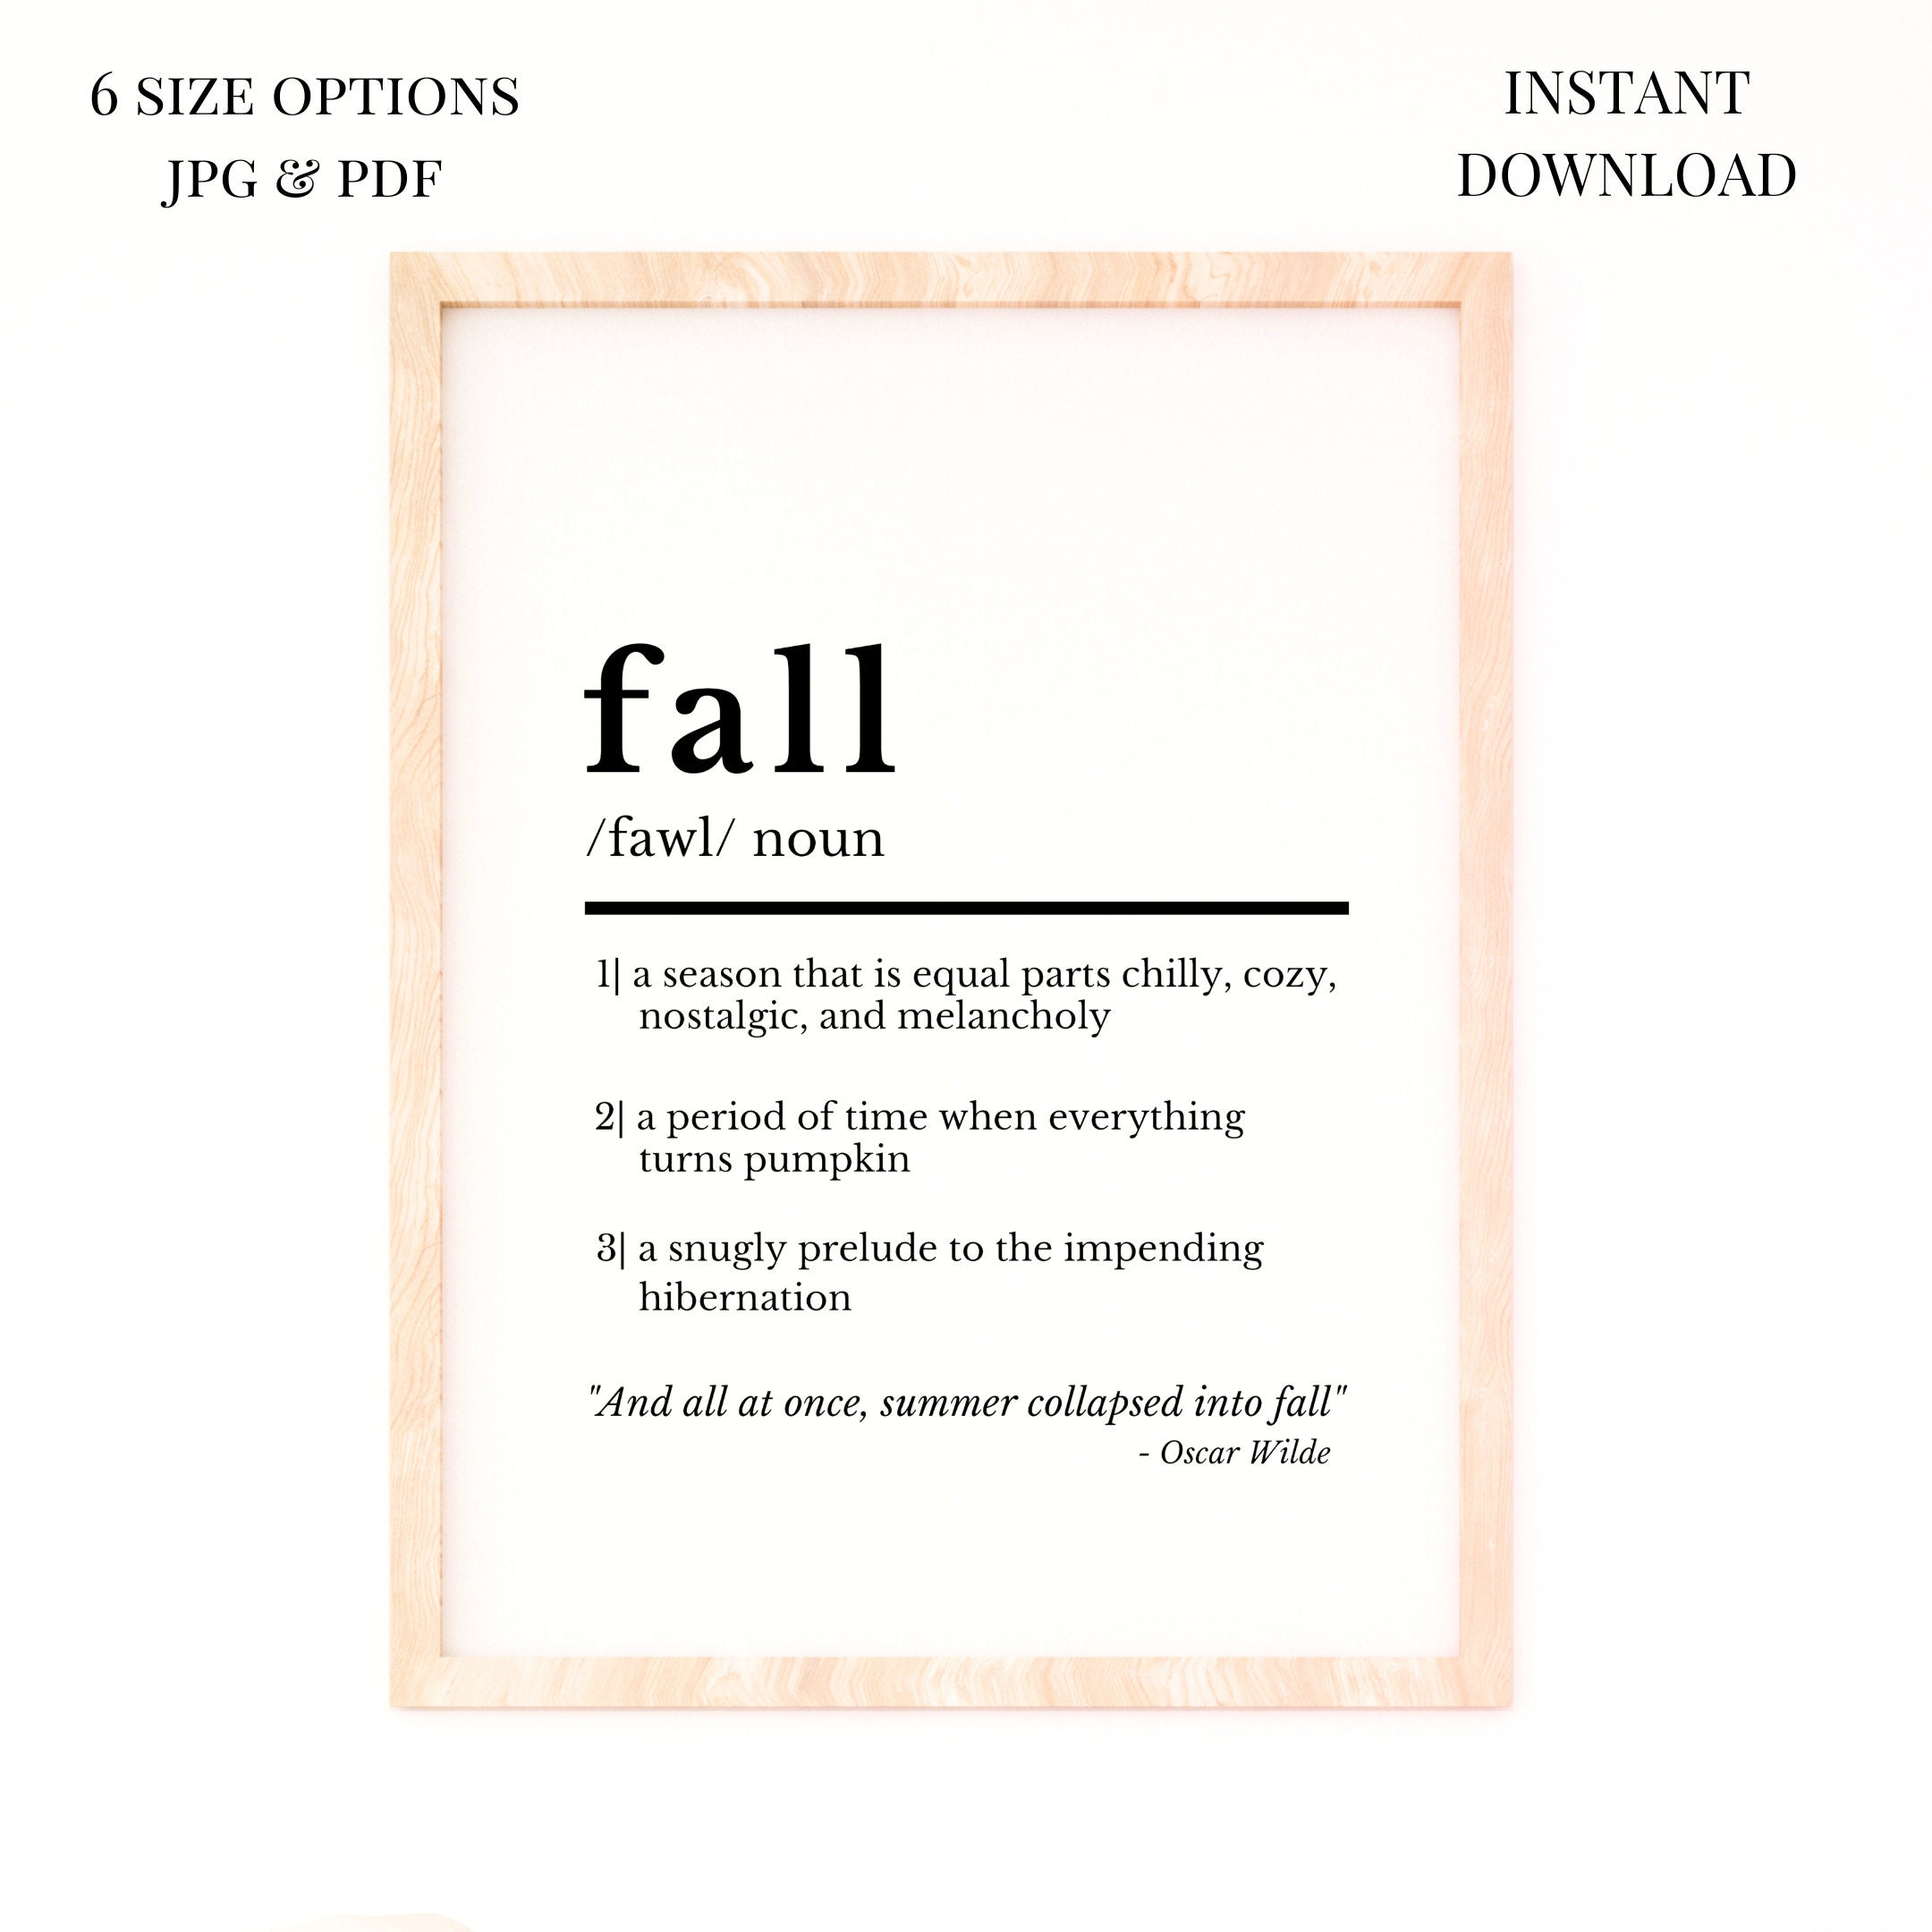 Fall guy - definition of fall guy by The Free Dictionary